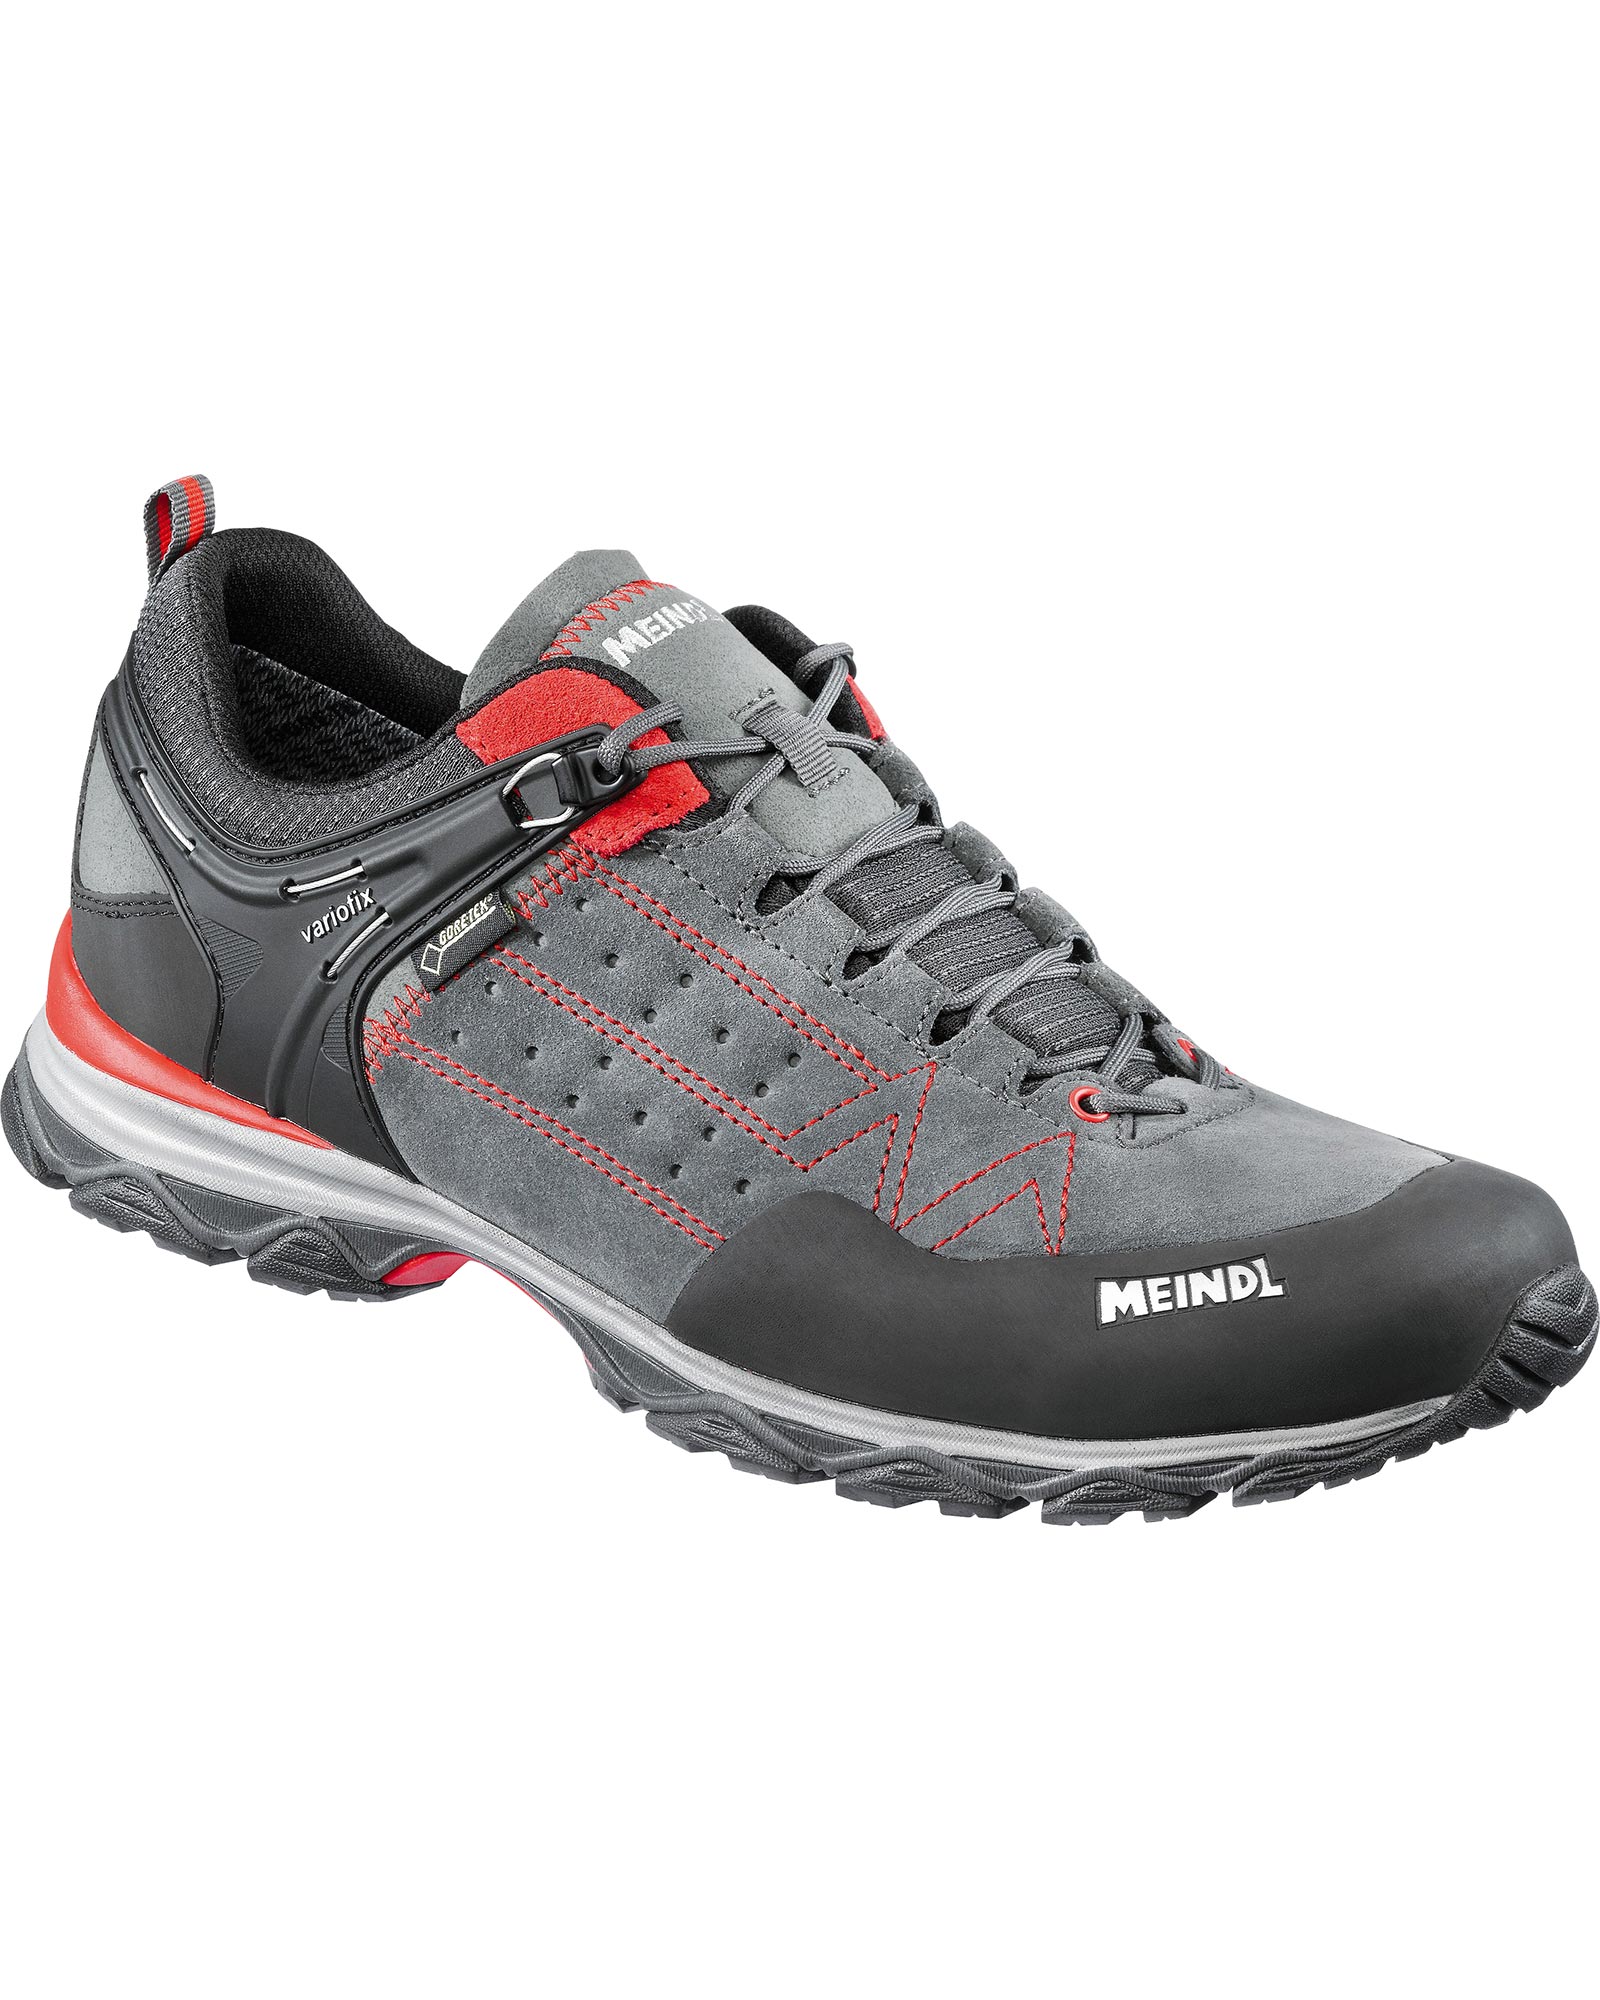 Meindl Ontario GORE TEX Men’s Shoes - Red/Anthracite UK 8